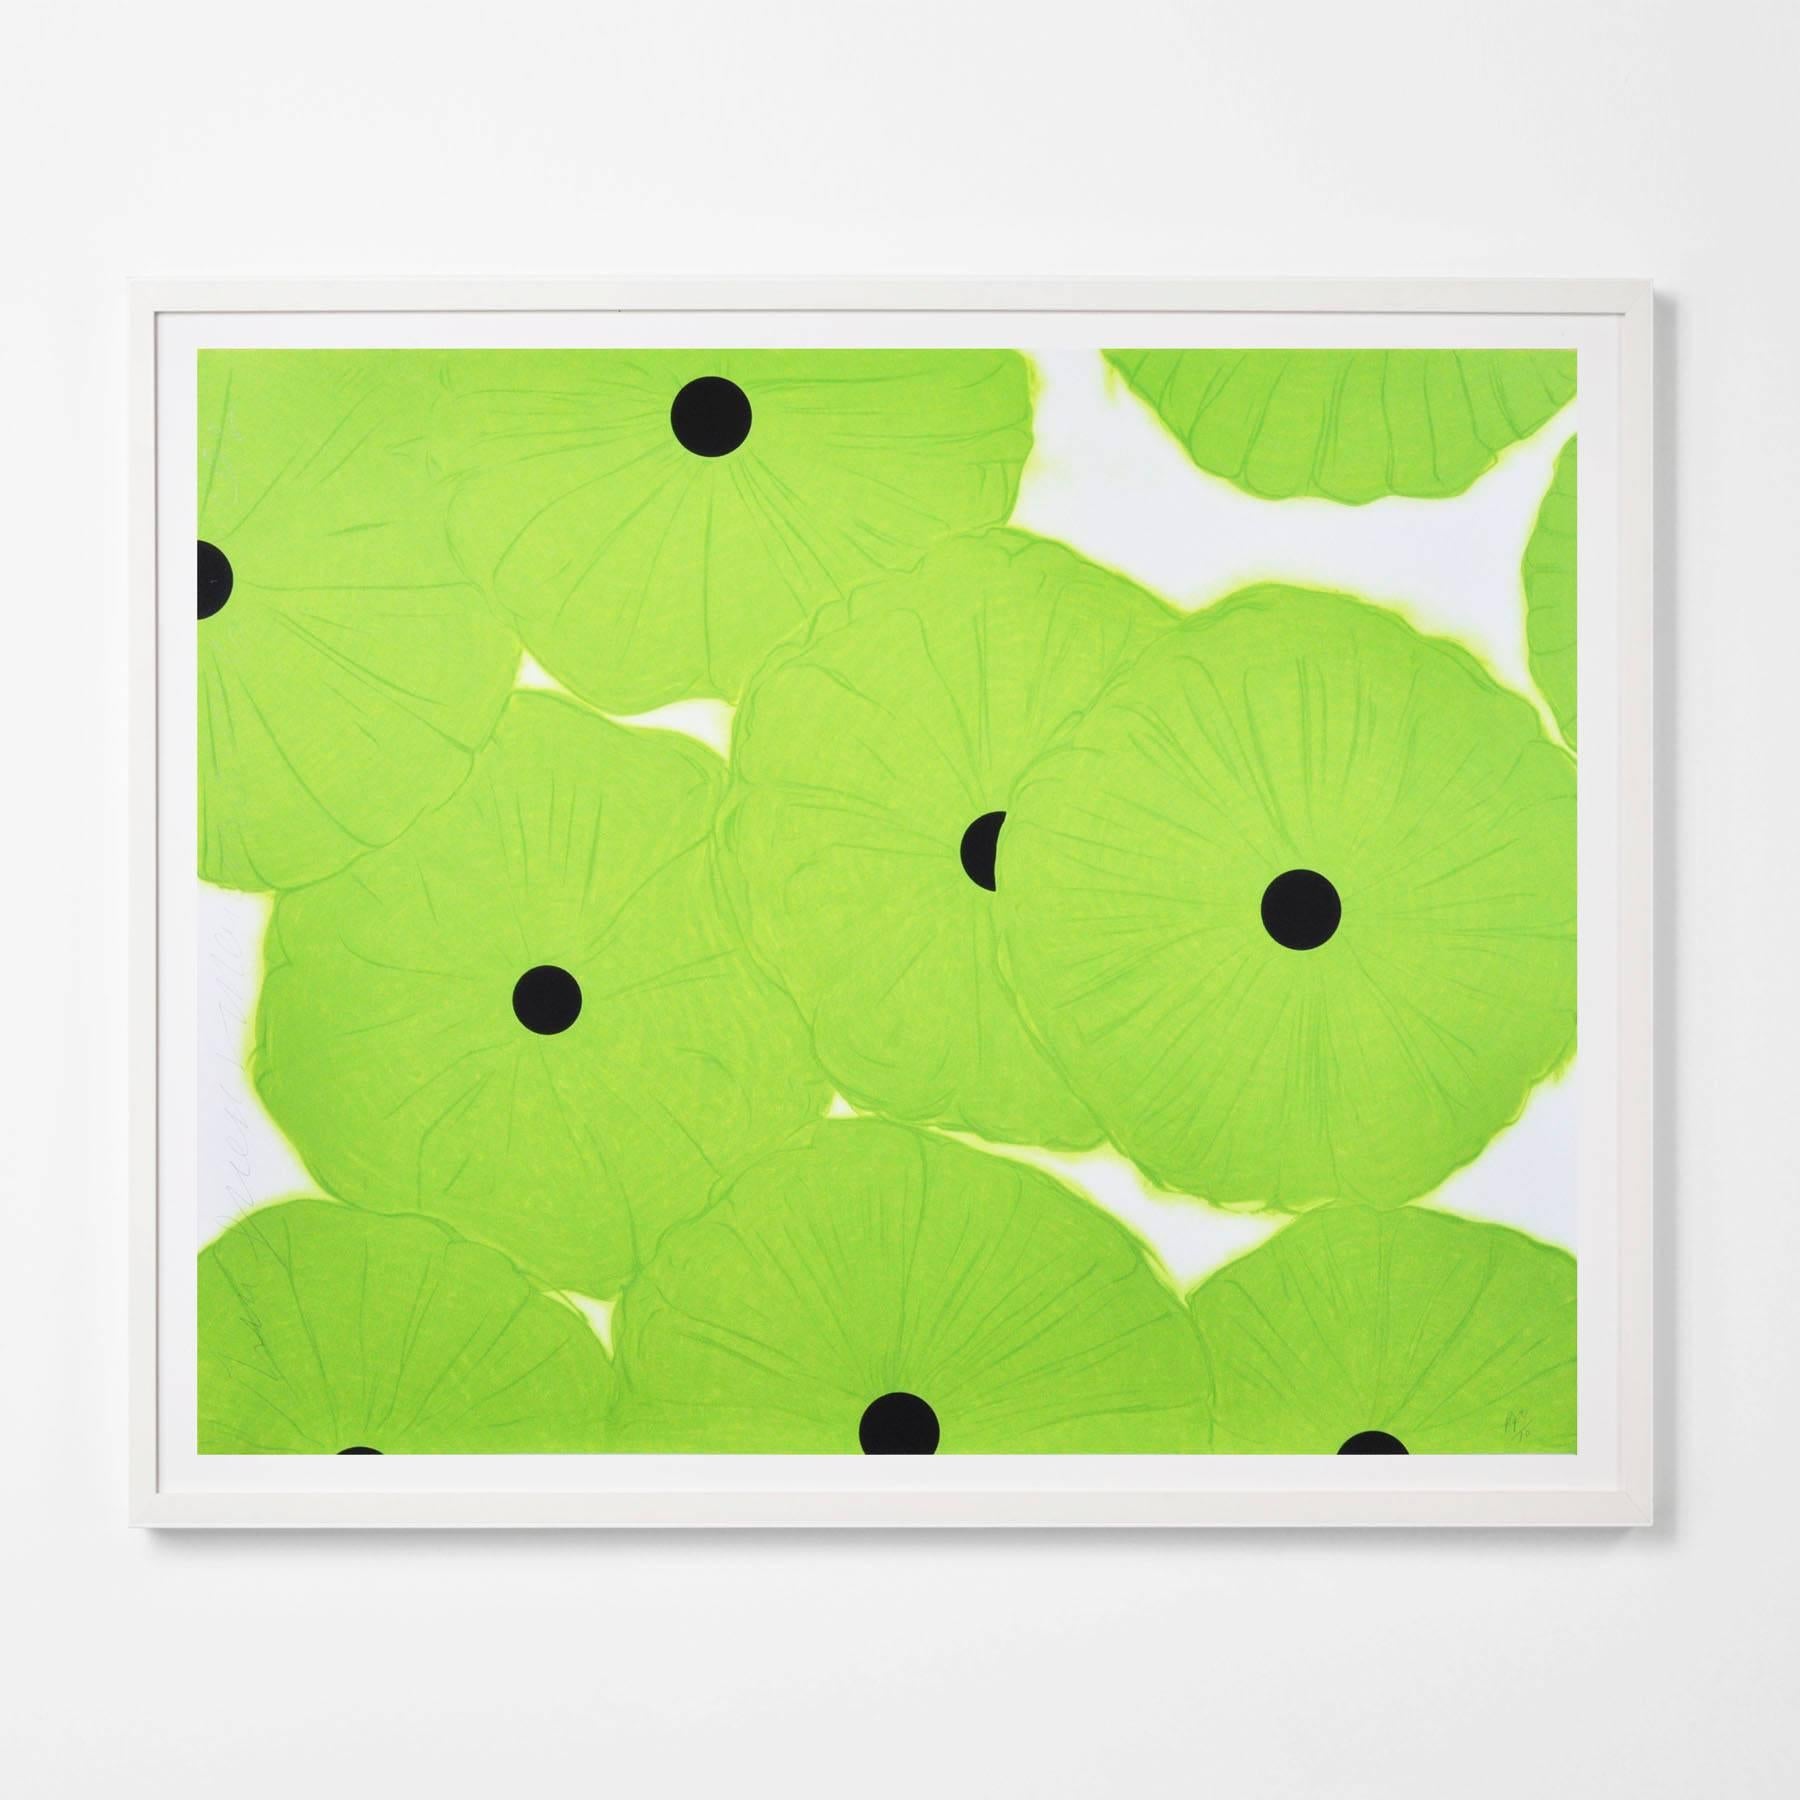 Ten Greens (Poppies) - Contemporary Print by Donald Sultan